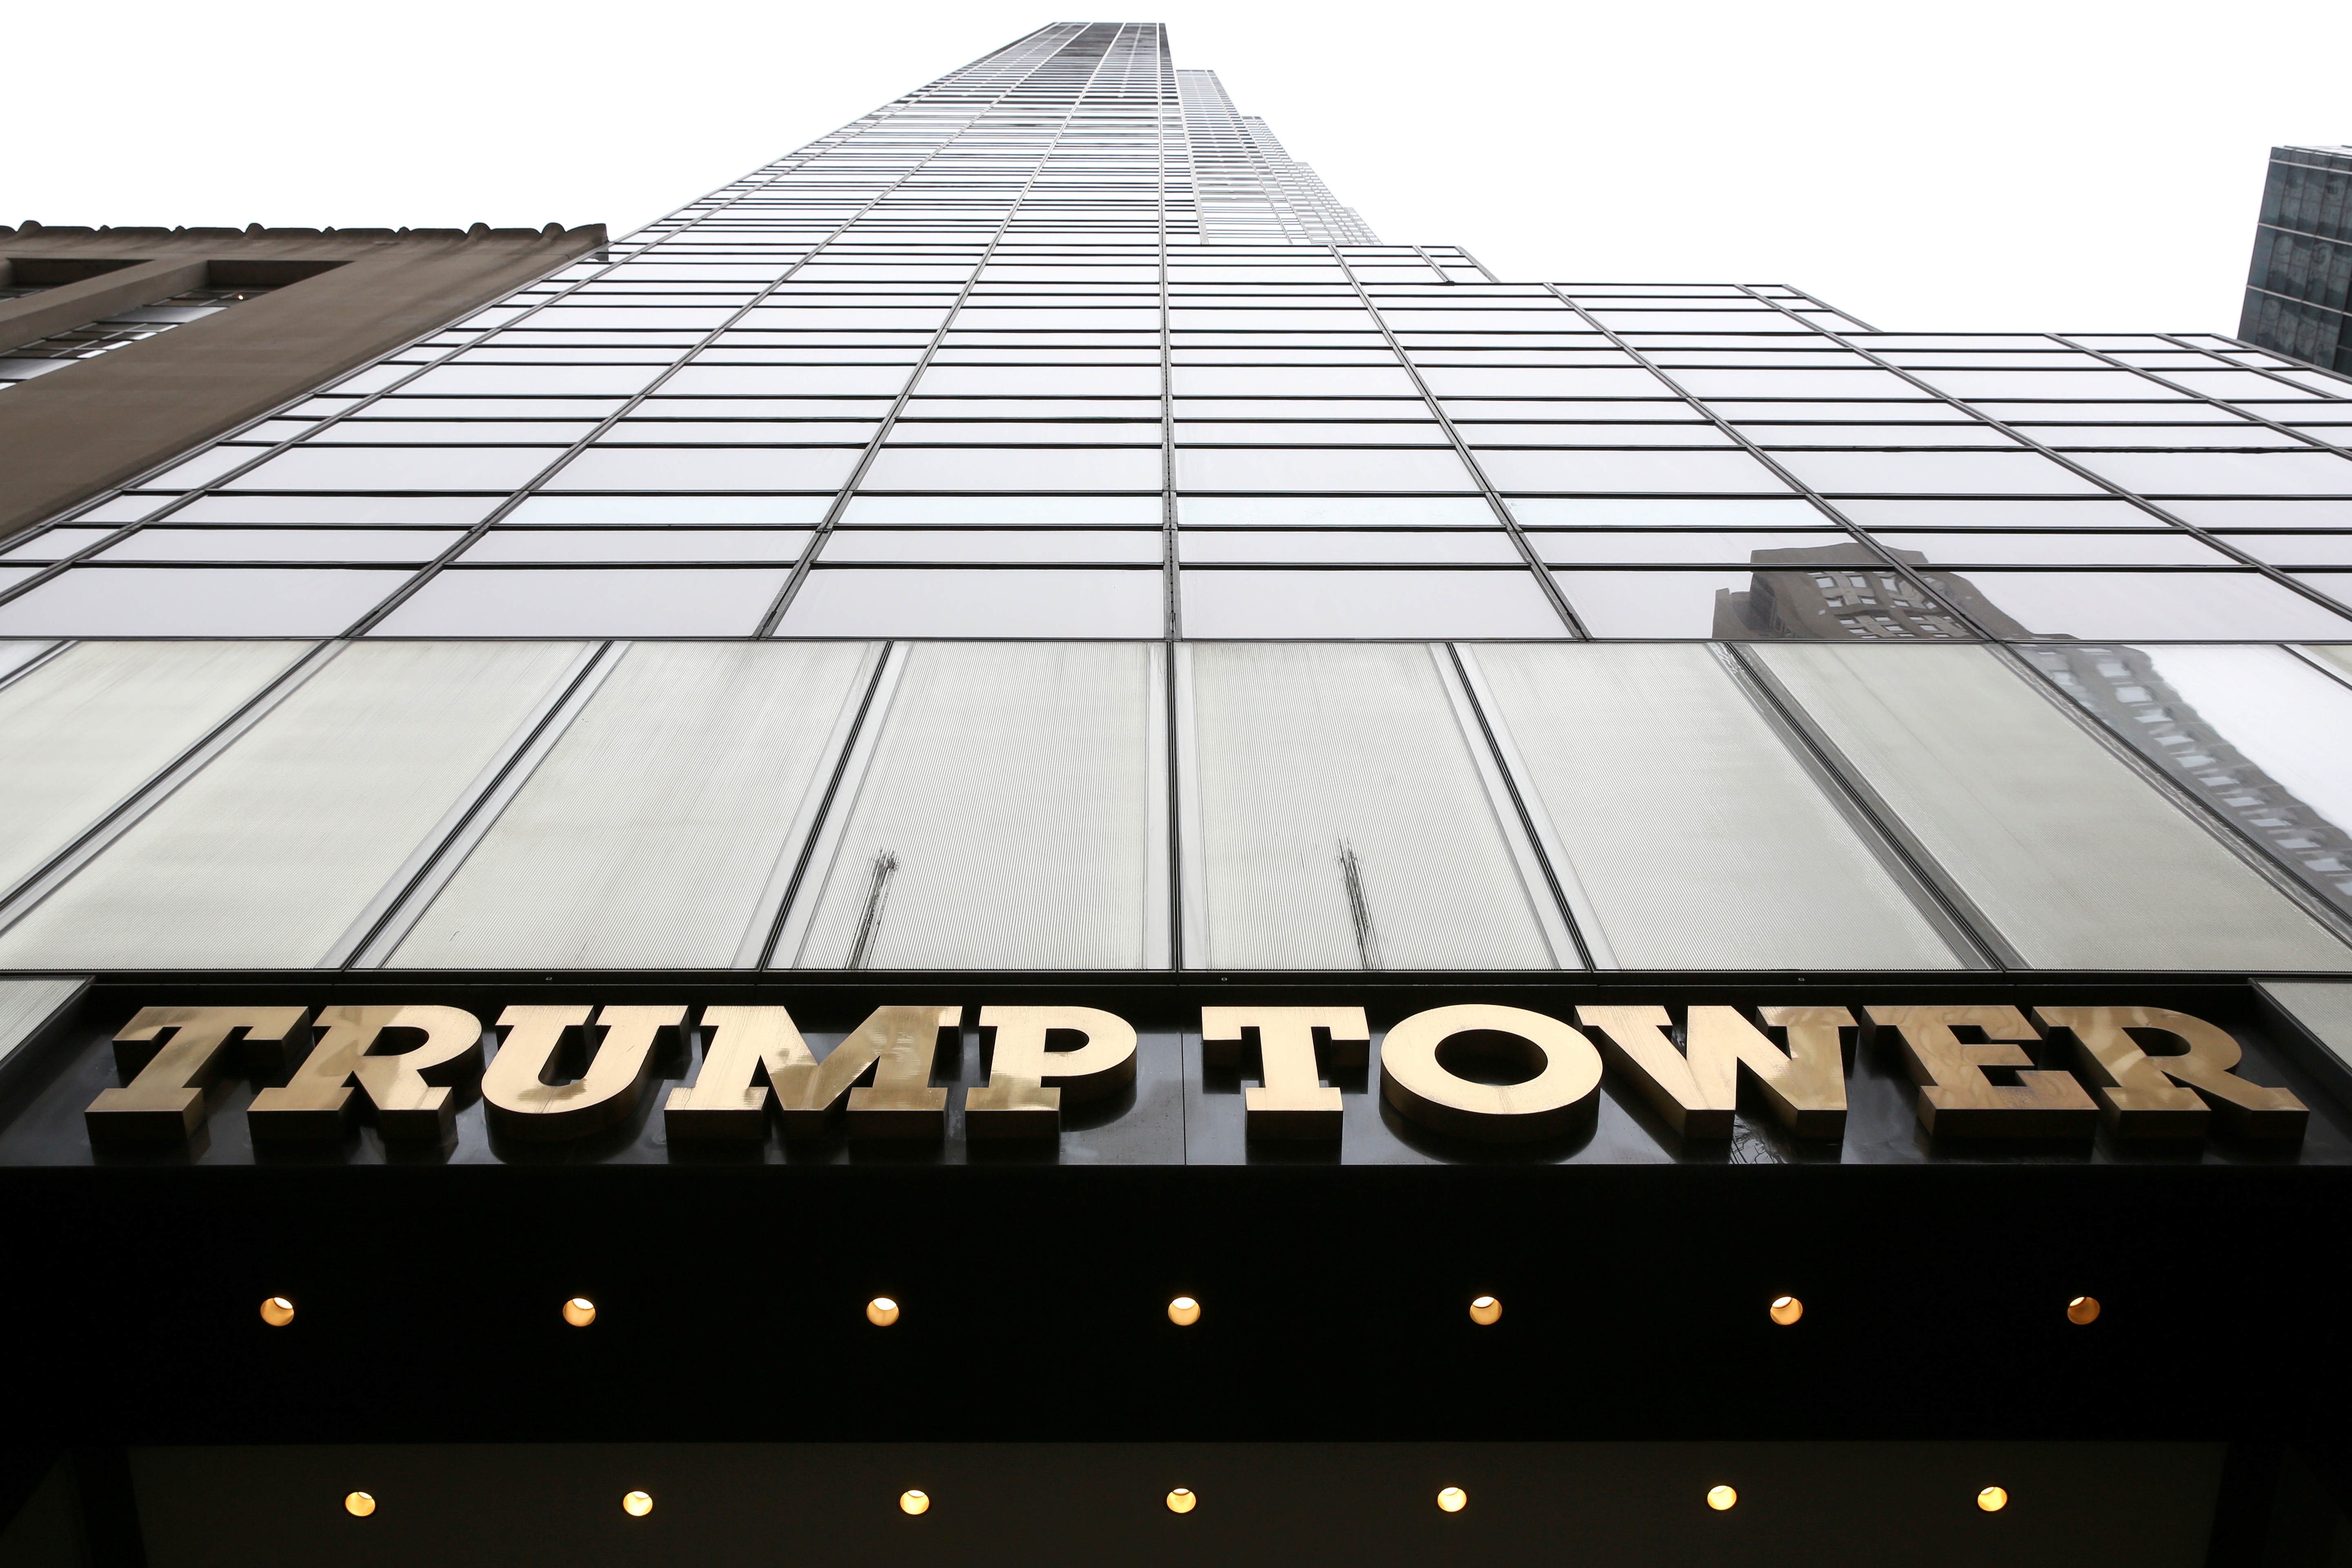 FILE PHOTO: Trump Tower on 5th Avenue is pictured in the Manhattan borough of New York City, New York, U.S., April 18, 2019. REUTERS/Caitlin Ochs/File Photo